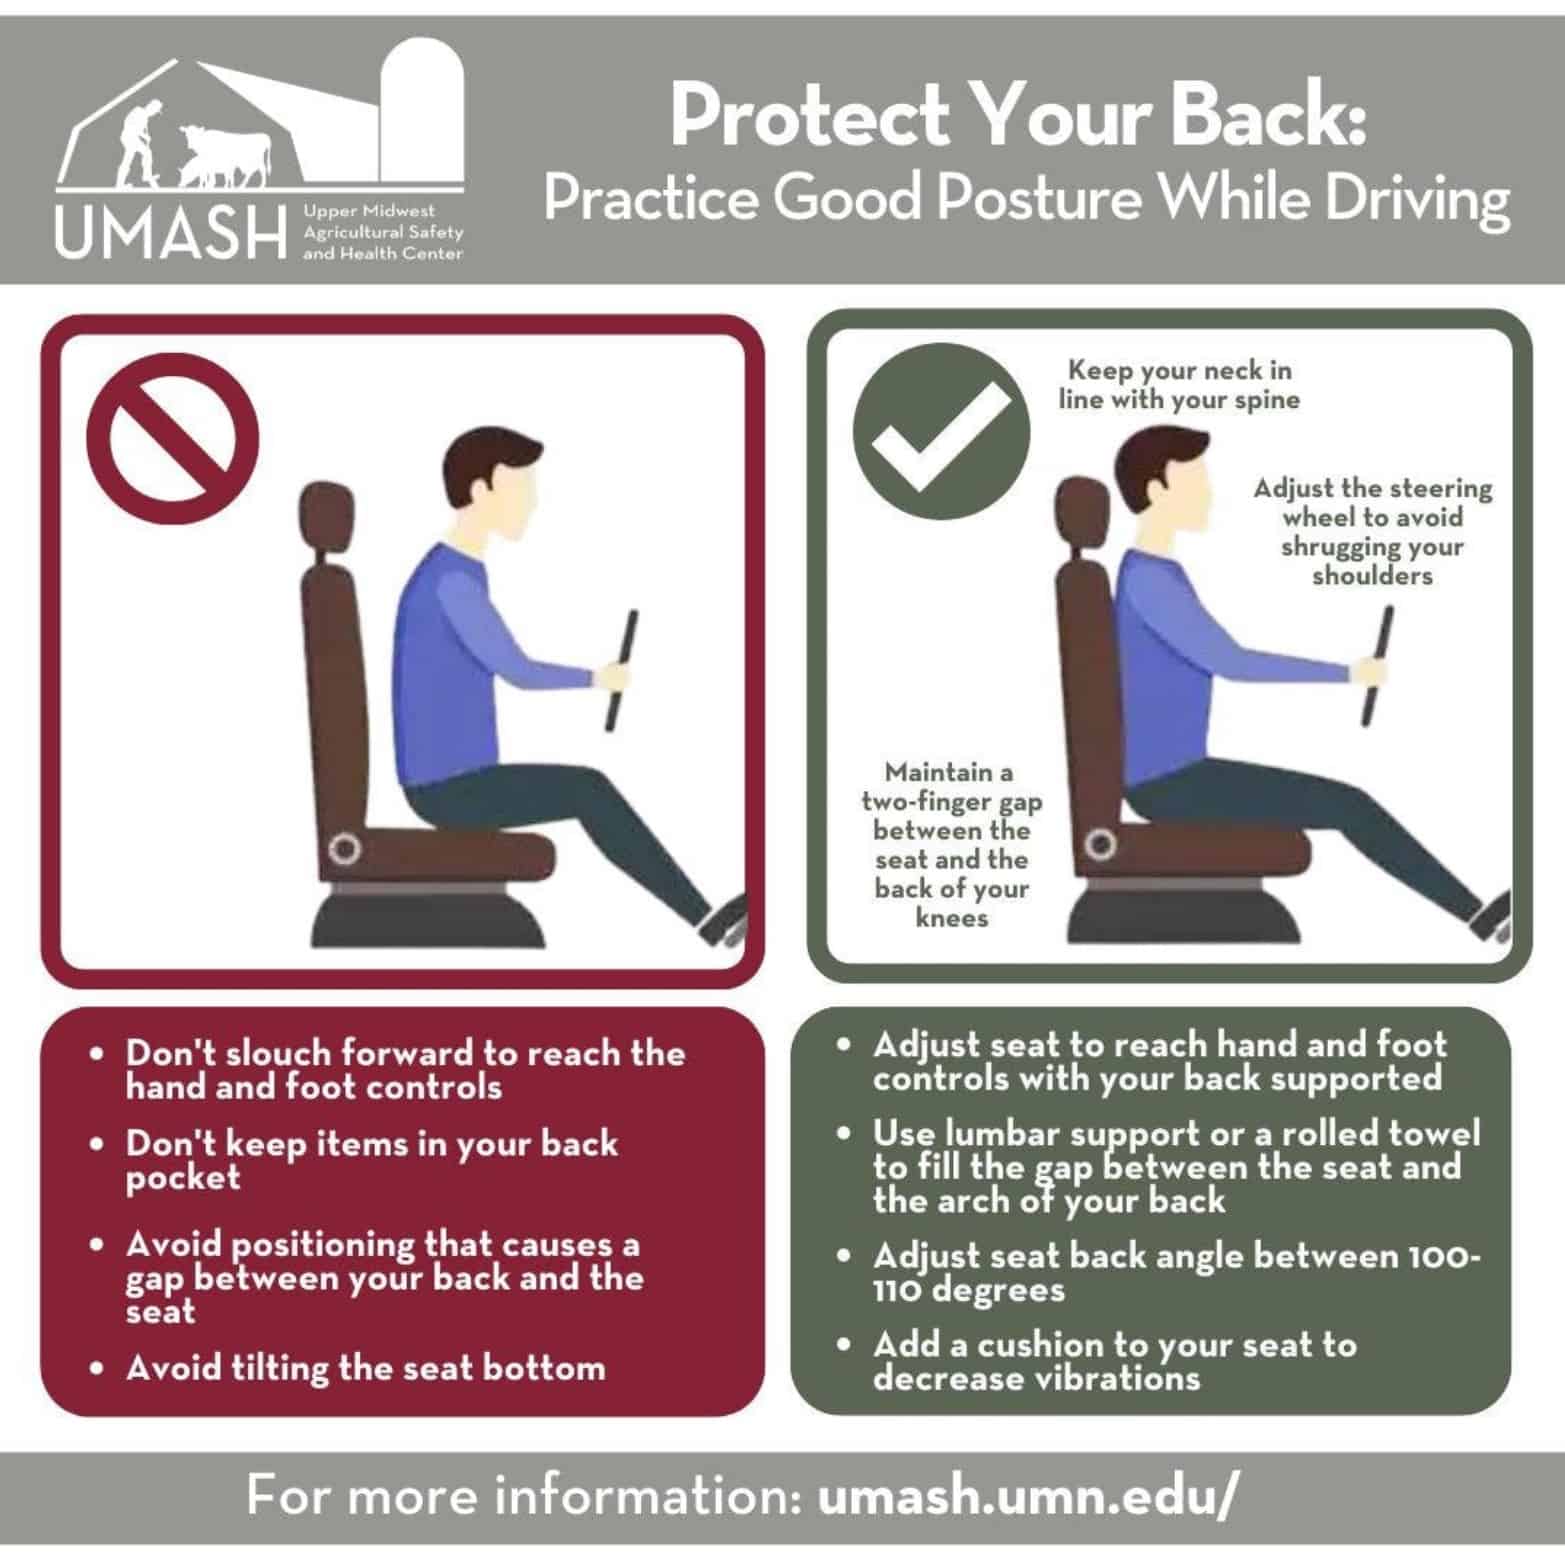 Practice Good Posture While Driving